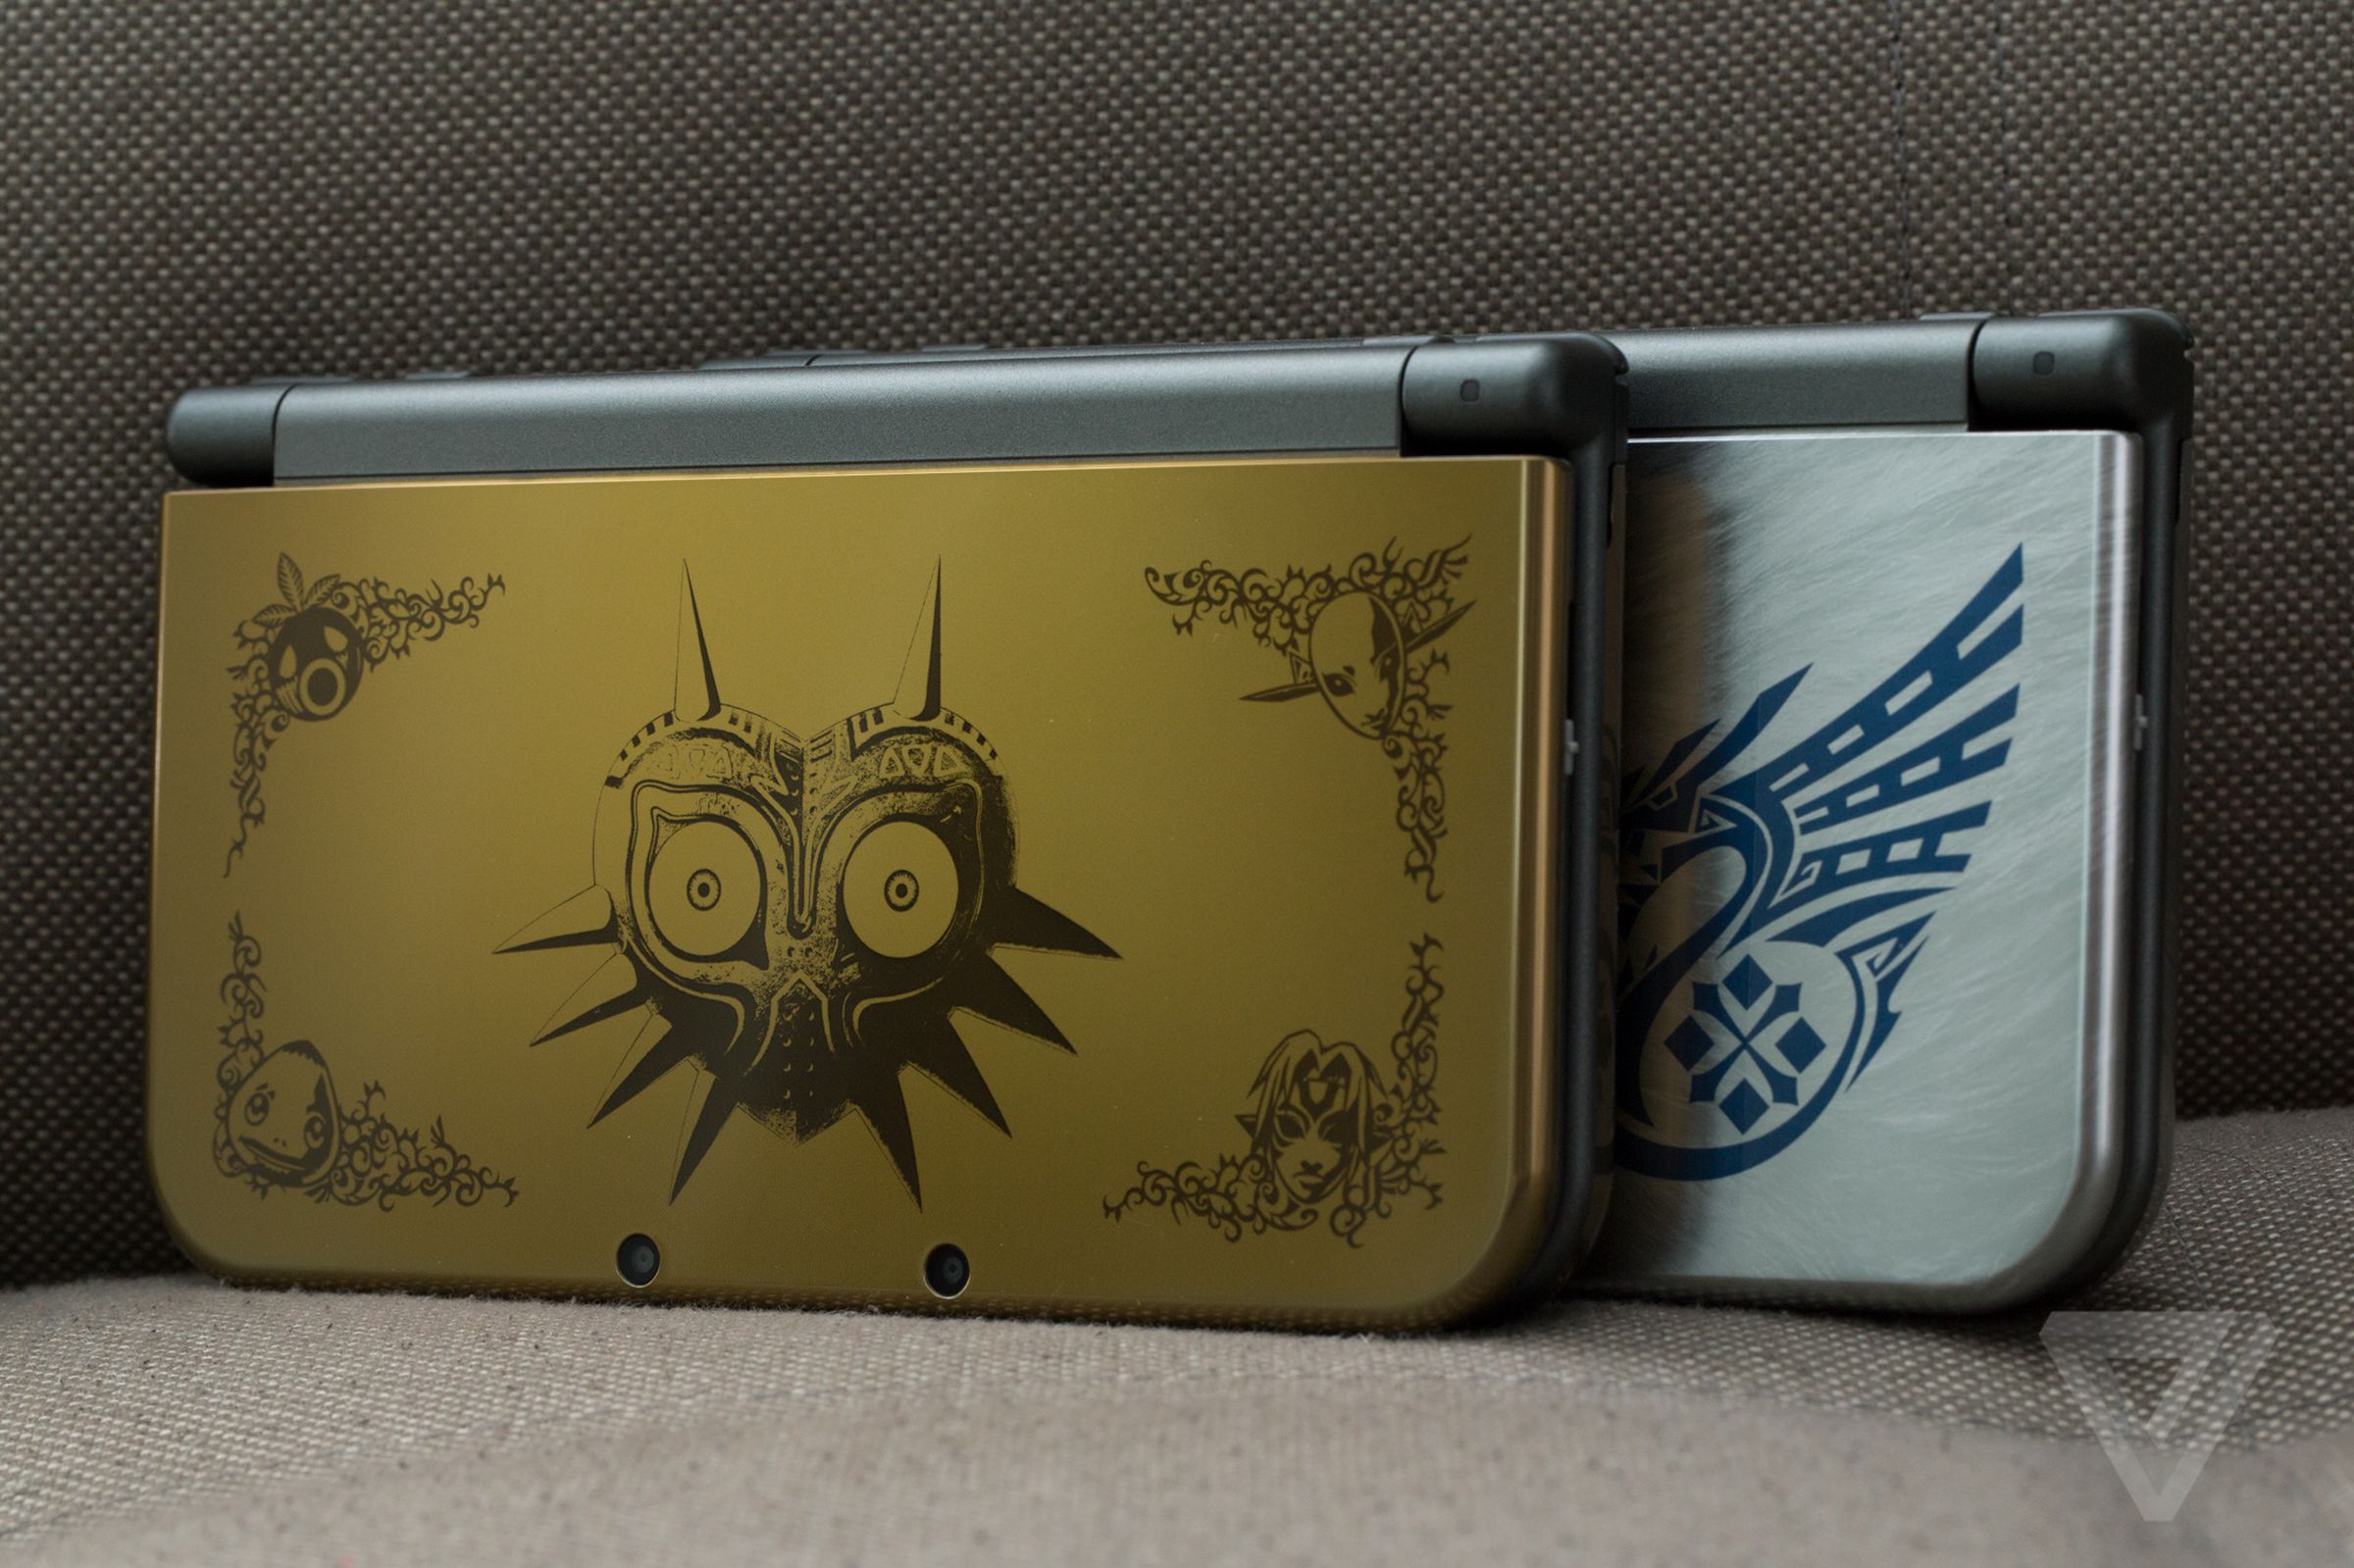 The new 3DS XL special edition